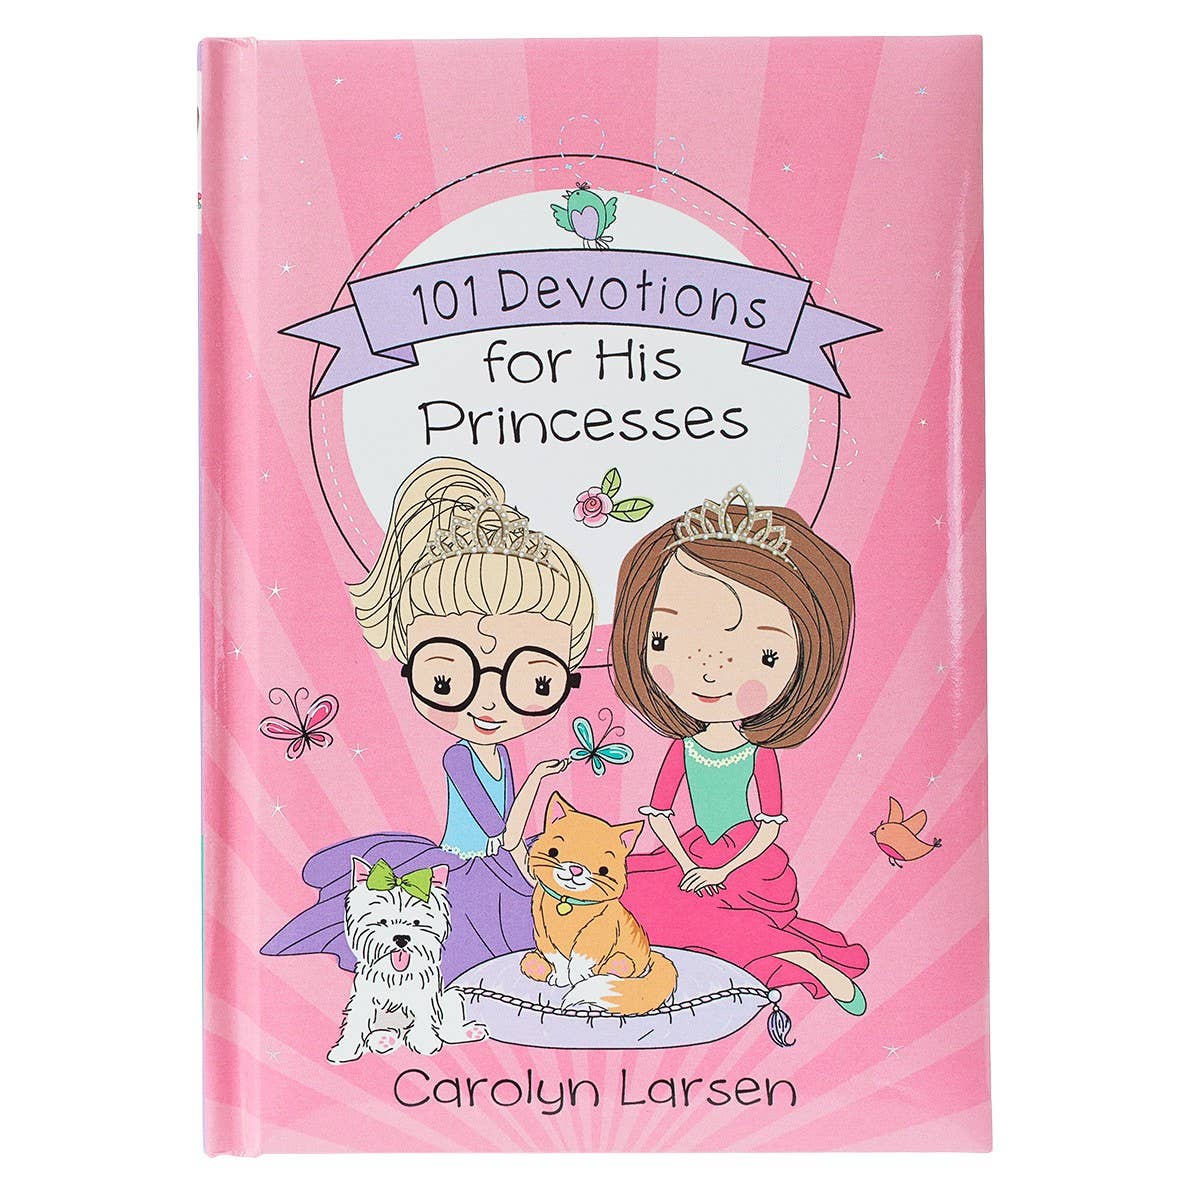 Christian Art Gifts - 101 Devotions for His Princess - An Initial Impression